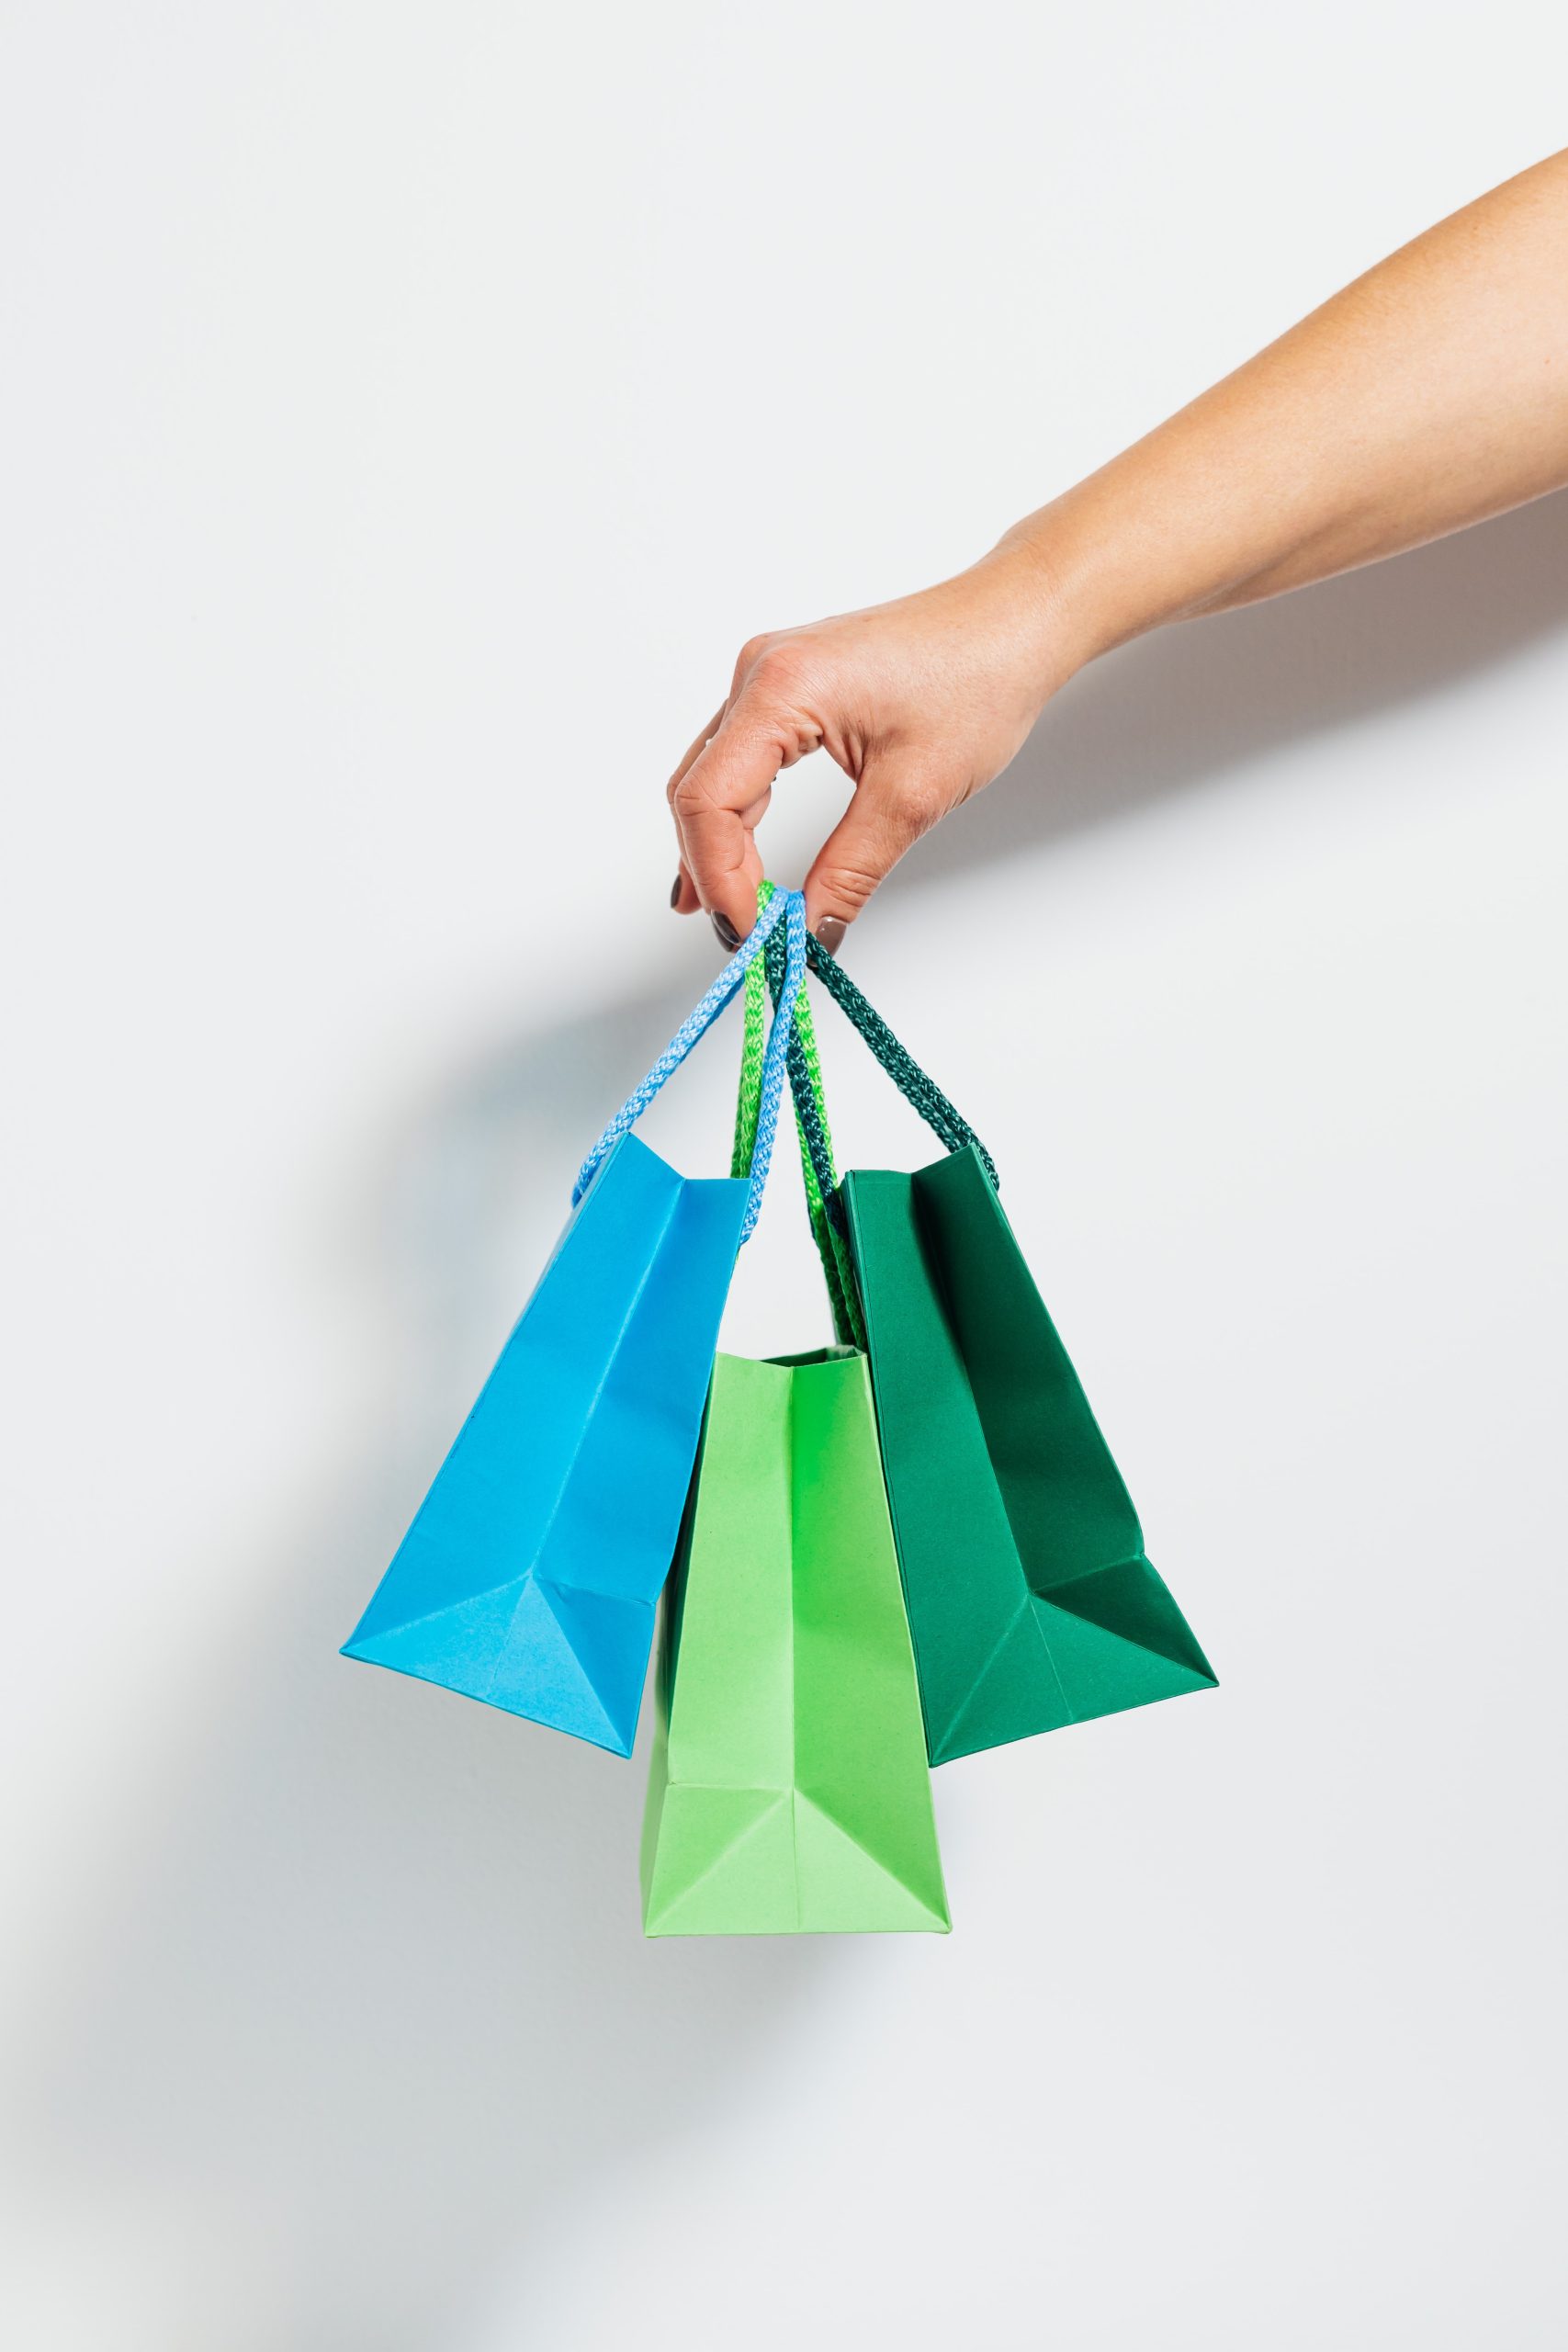 A hand holding 3 blue and green shopping bags.